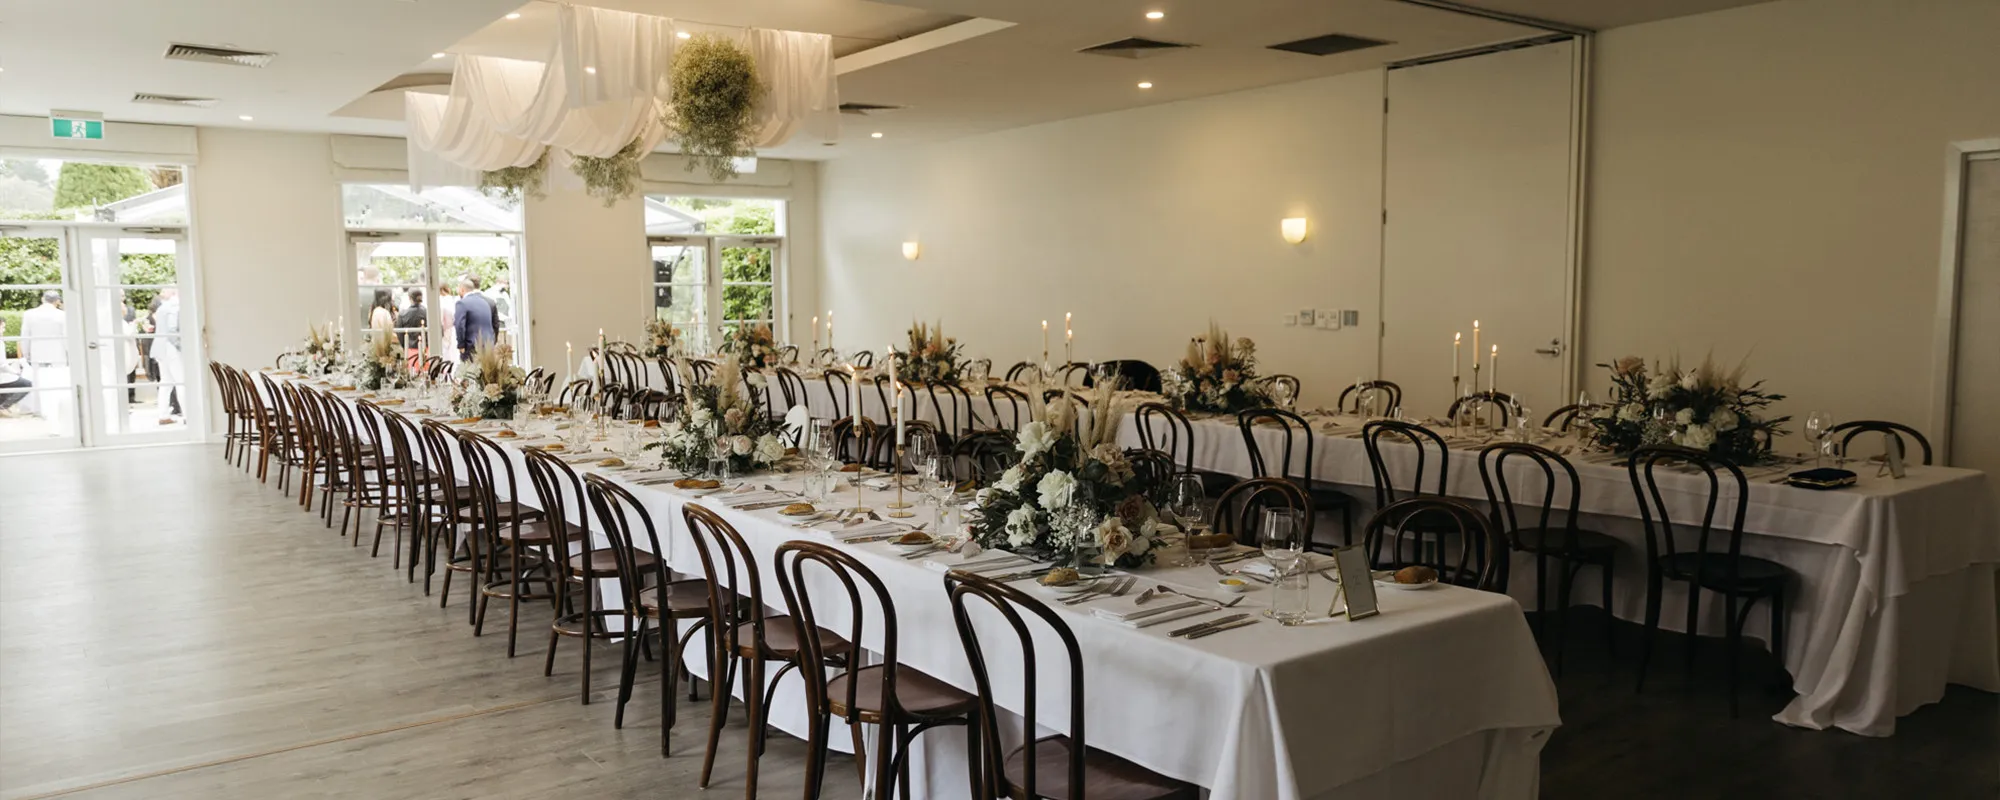 Lancemore Lindenderry Red Hill Boutique Luxury Accommodation Melbourne Wedding Venue Reception Lancemore Weddings 2000 x 800 3